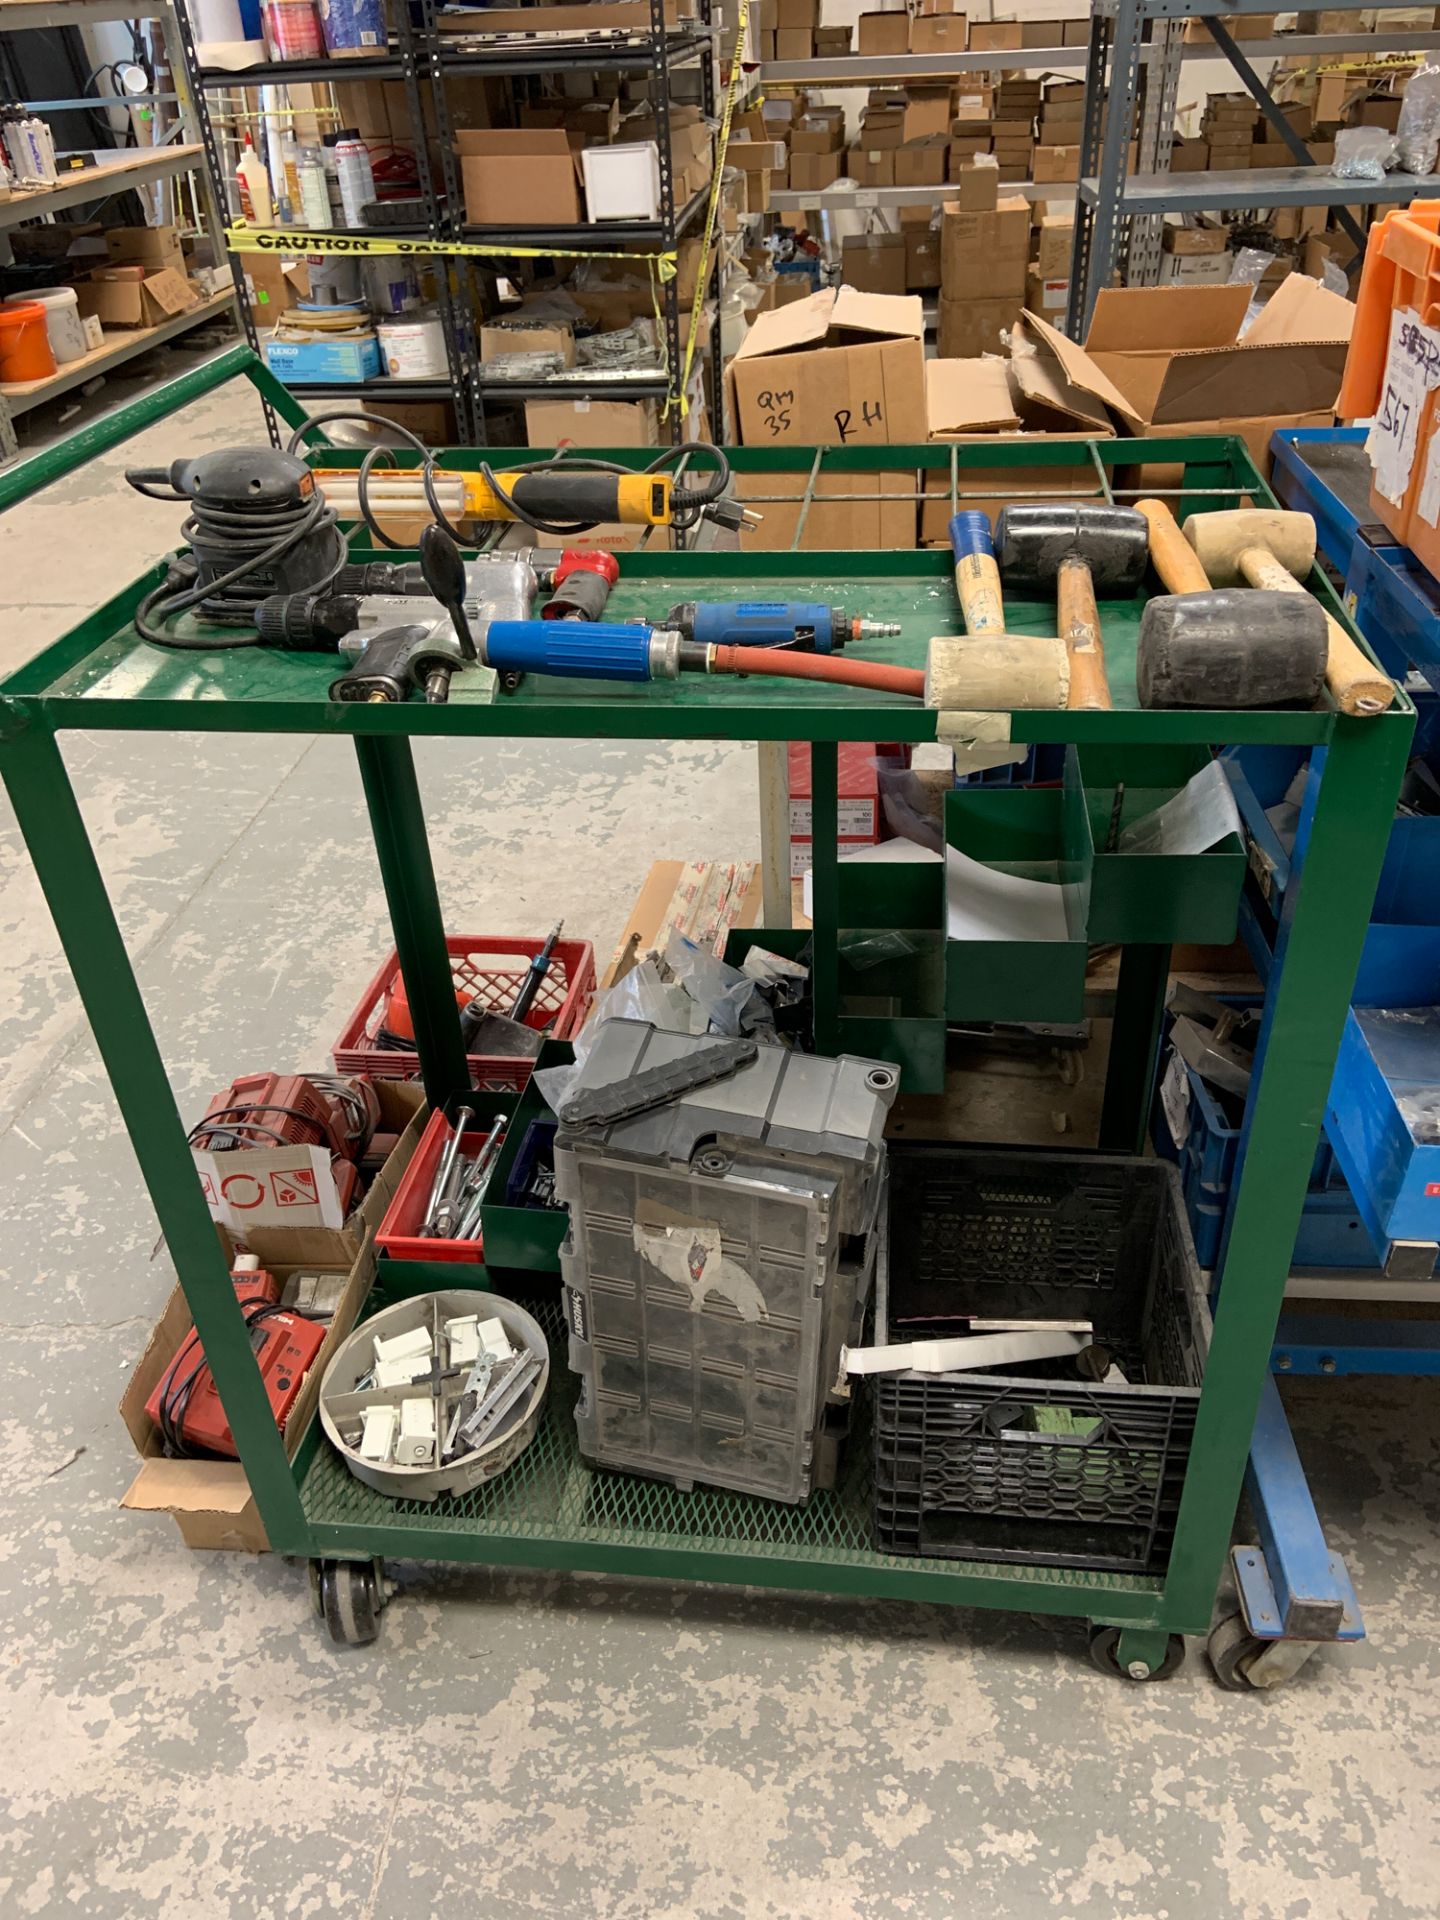 LOT/ SHOP CARTS WITH HARDWARE AND POWER TOOLS - Image 2 of 3